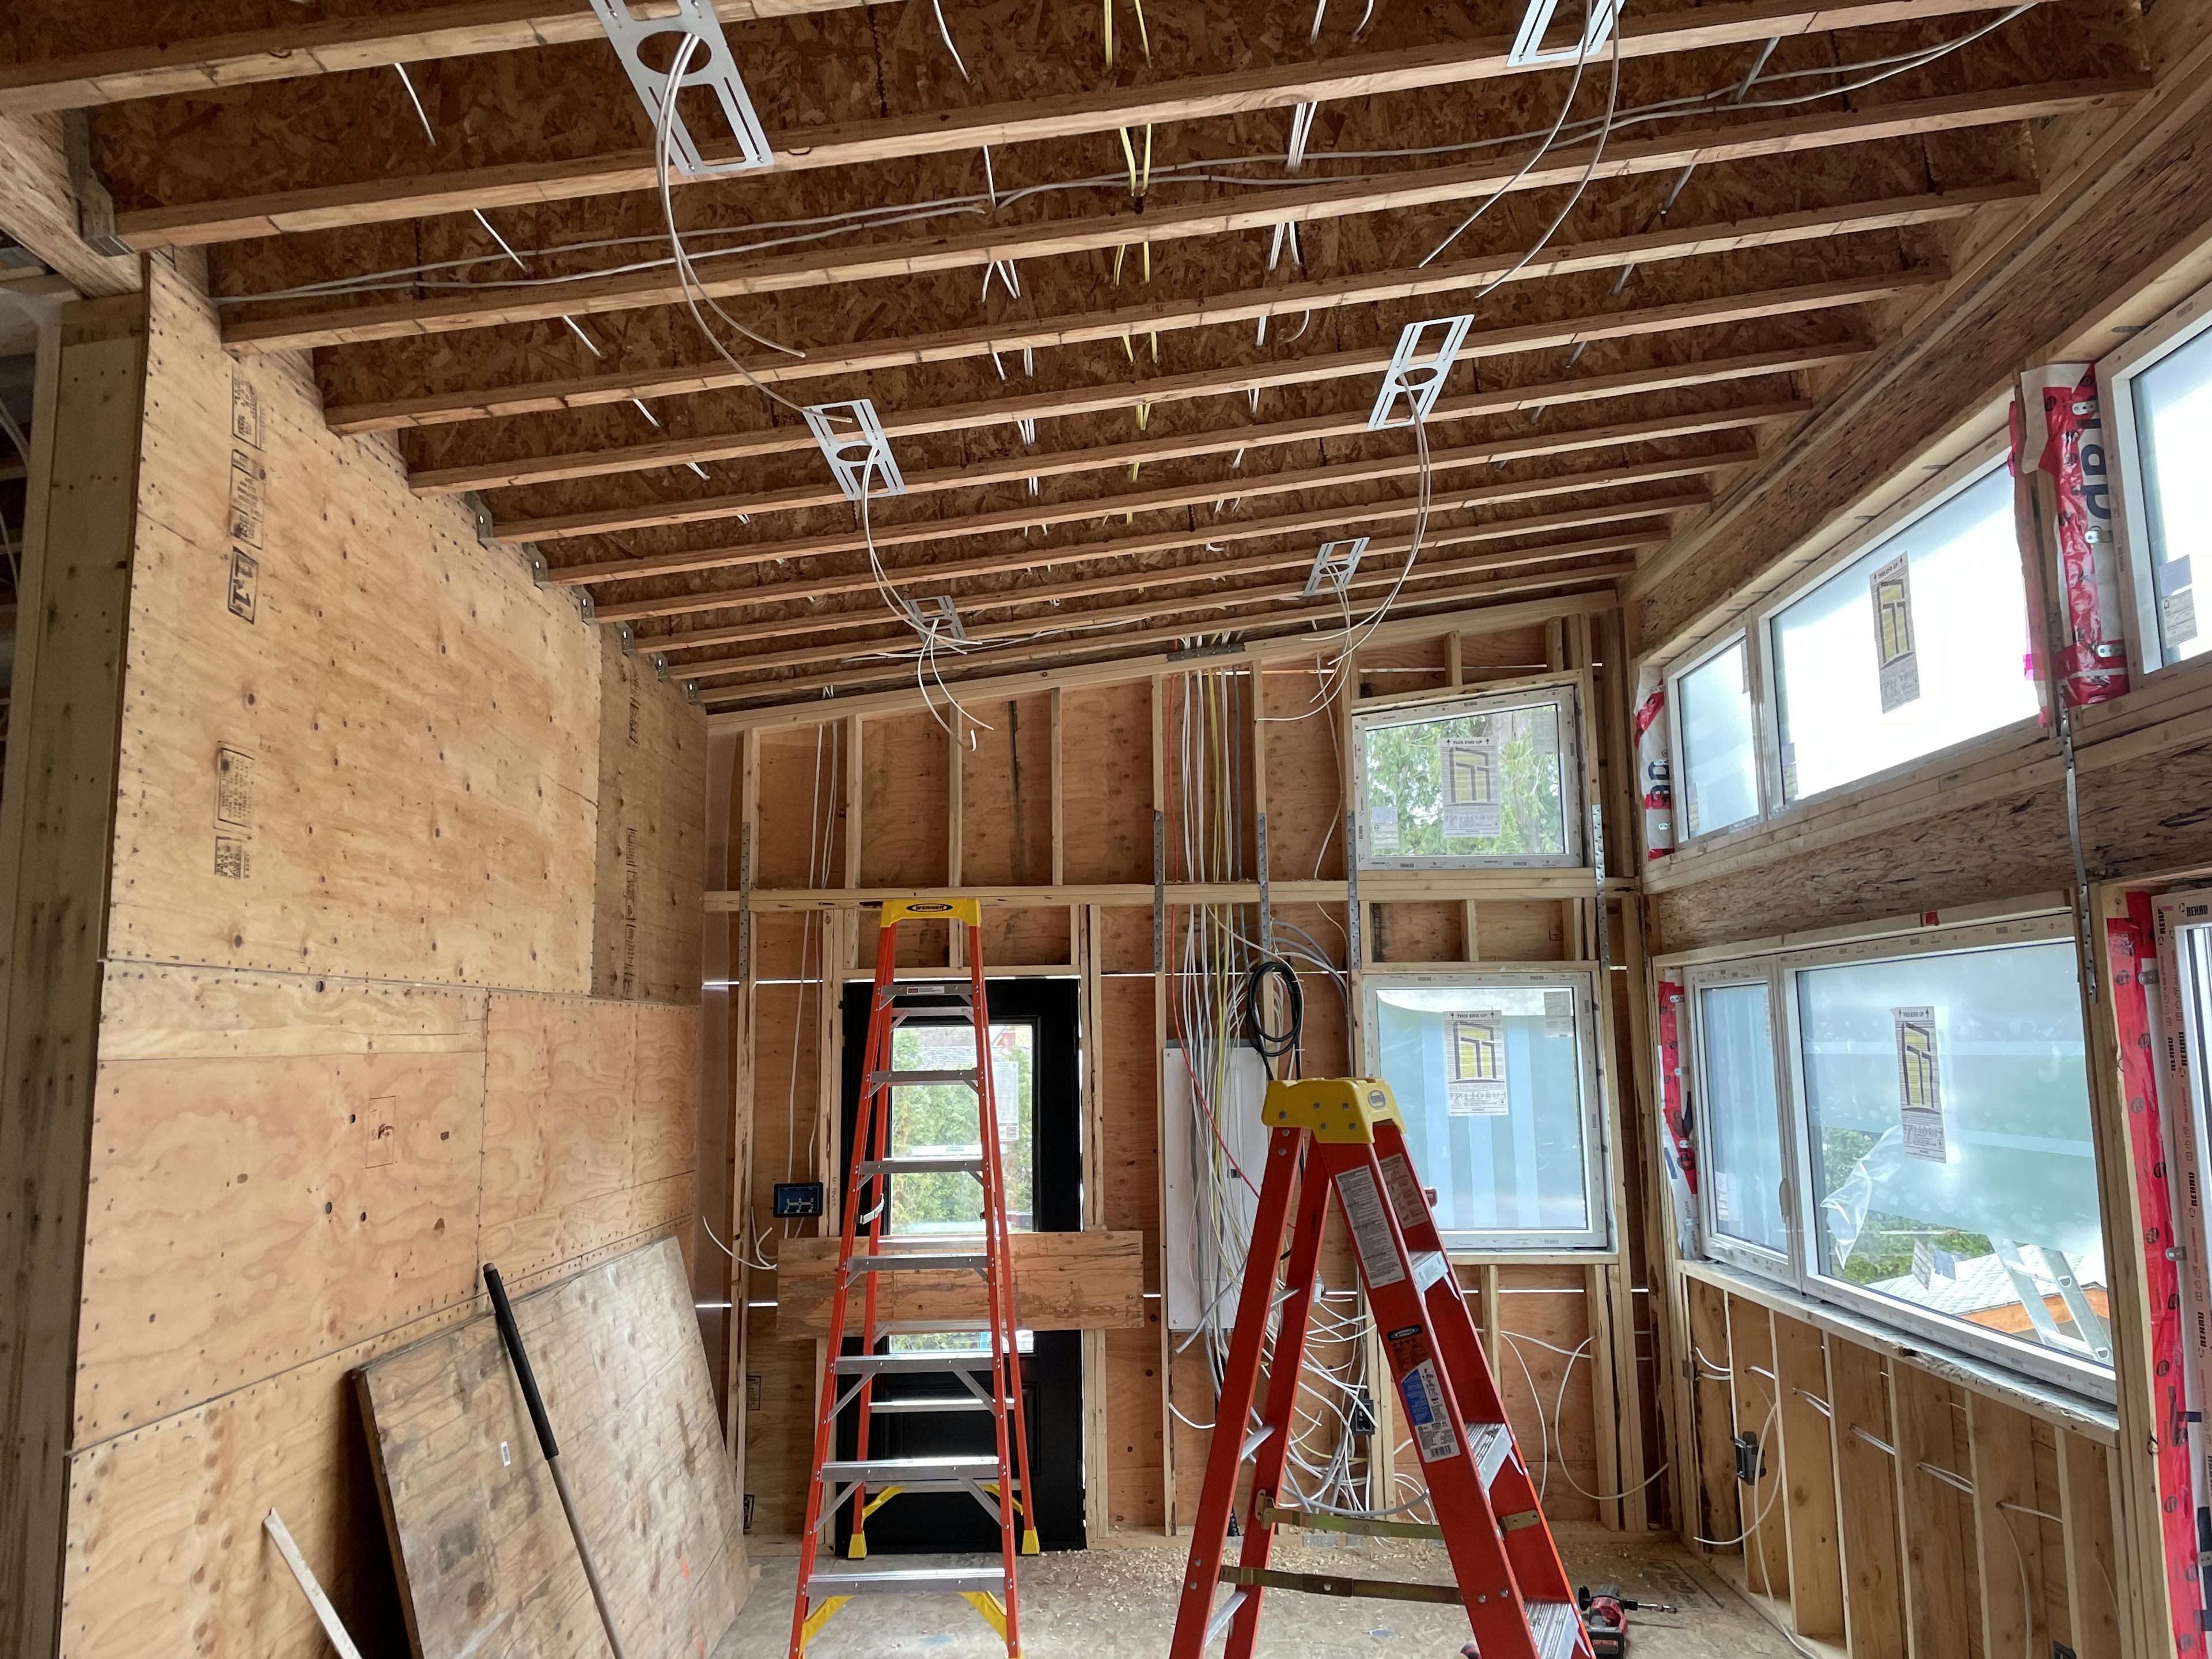 recessed lighting installed by squamish electrician reliable residential, commercial, and industrial electrical contractors